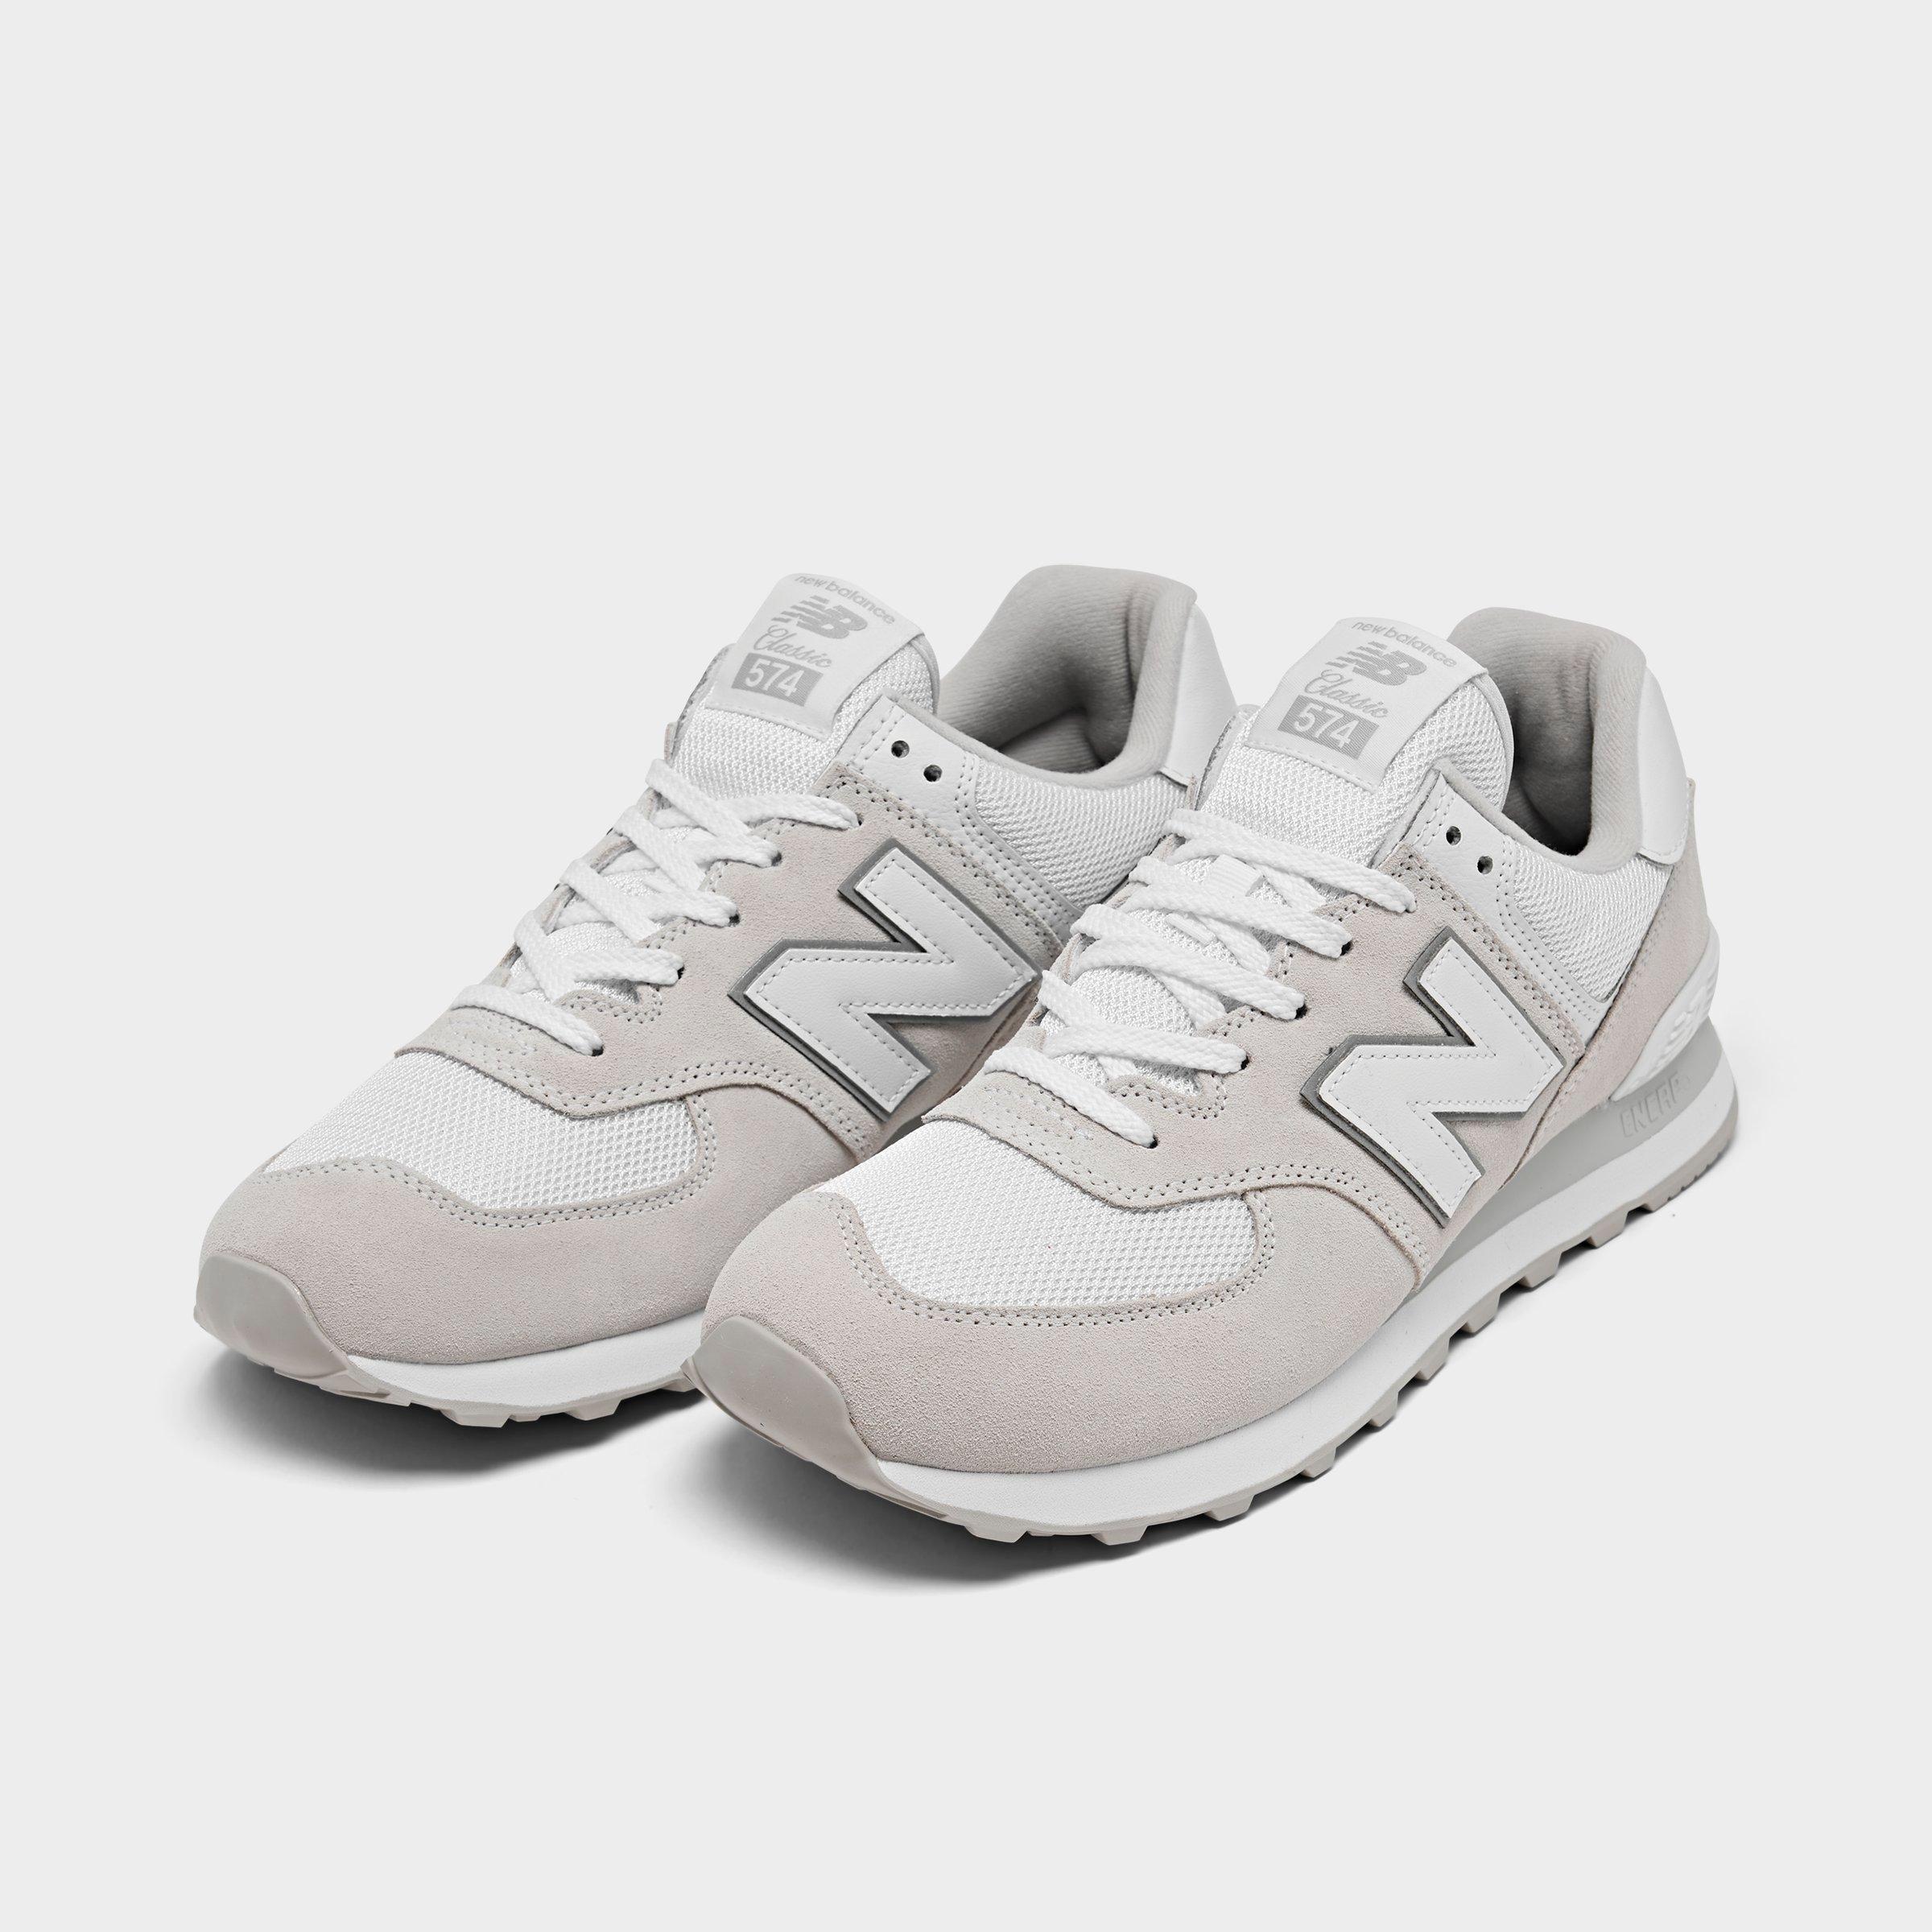 Men's New Balance 574 Casual Shoes| JD 